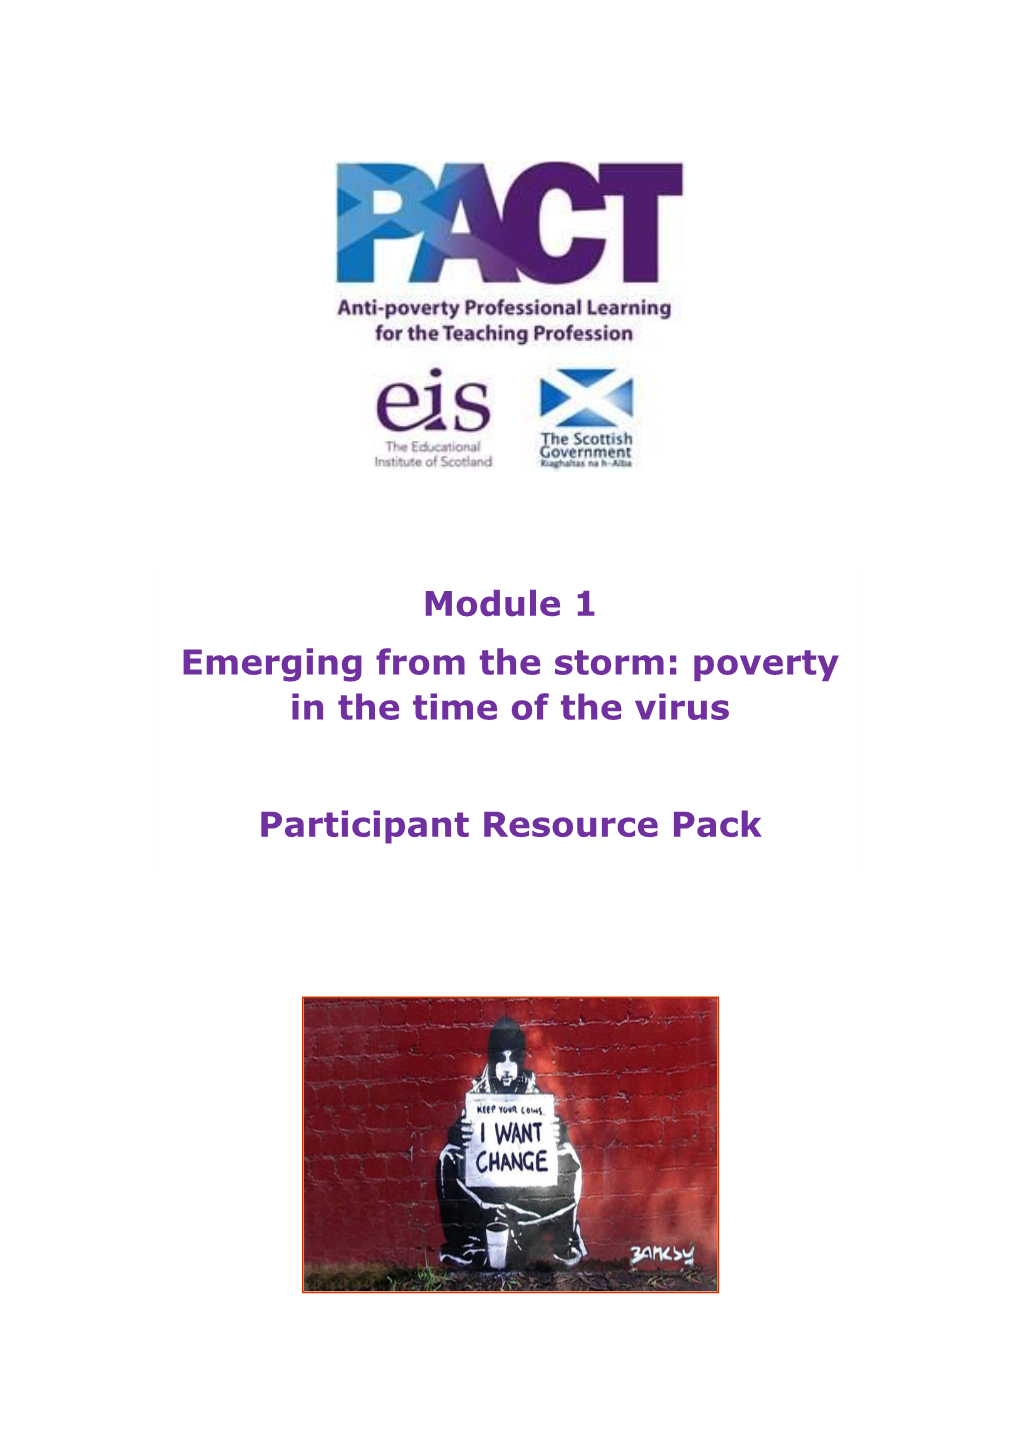 Module 1 Emerging from the Storm: Poverty in the Time of the Virus